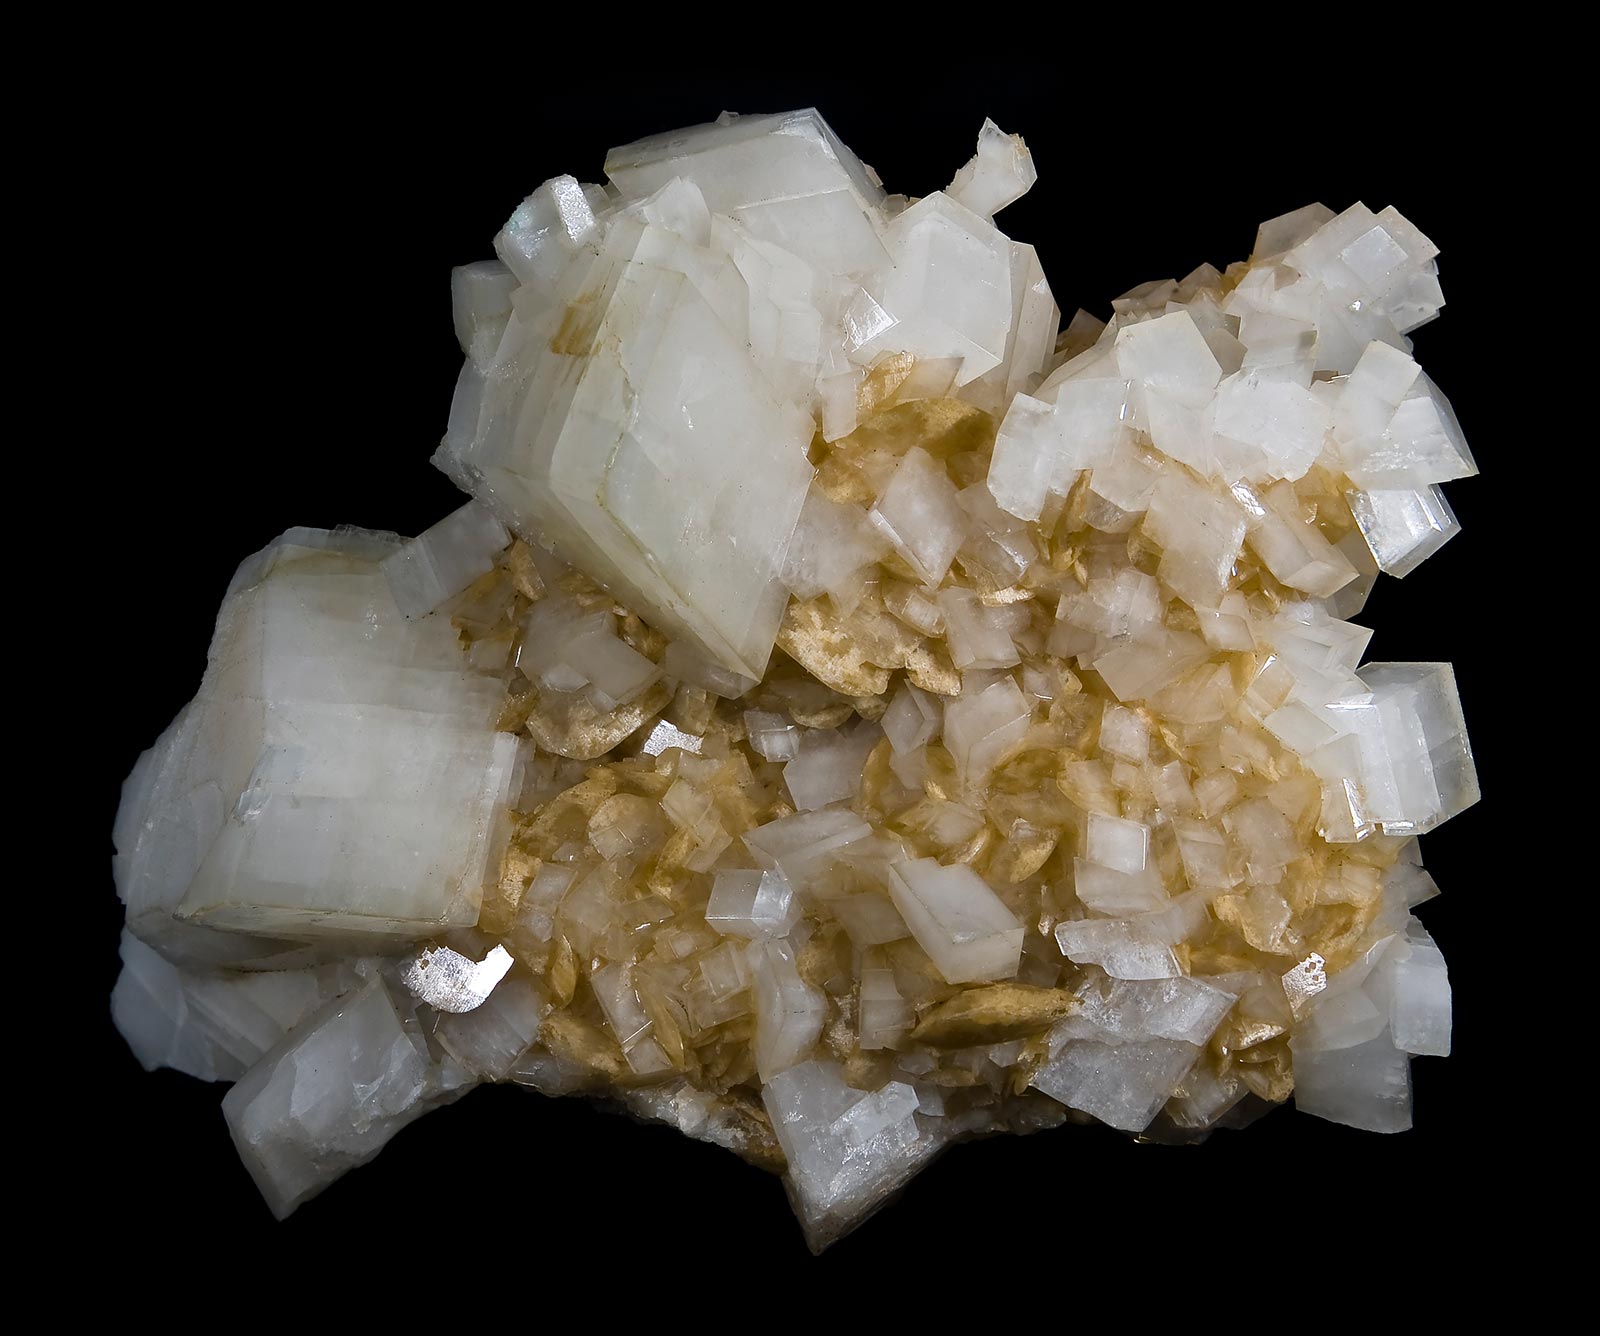 Cluster of rhombic dolomite and magnesite crystals from Azcárate Quarry, Navarre, Spain